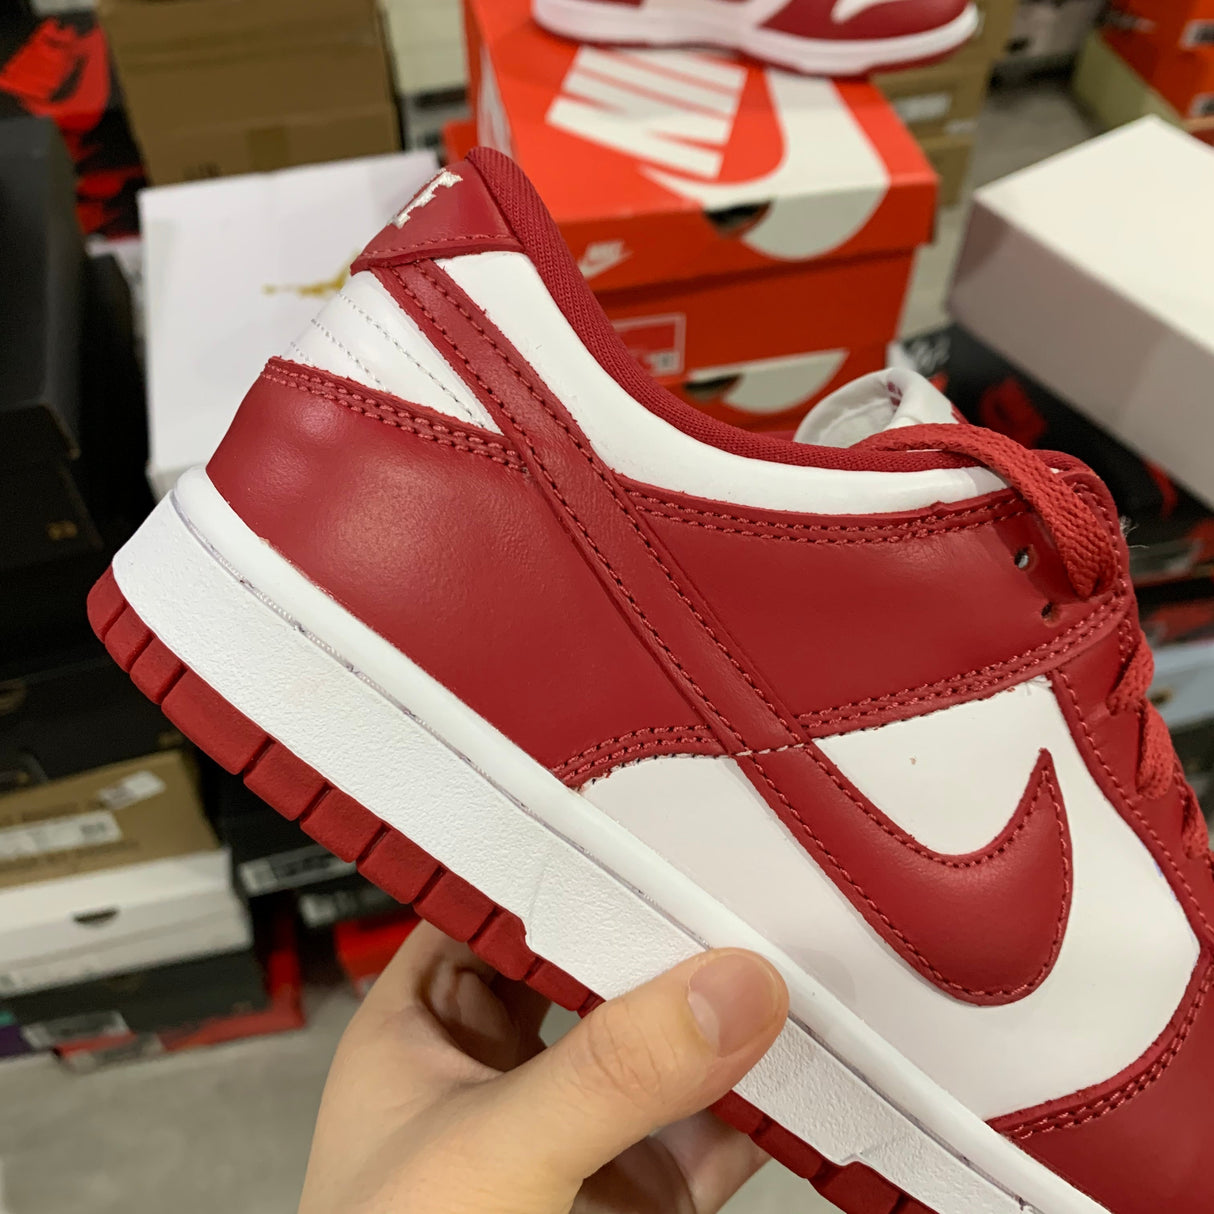 Nike Dunk Low "University Red" - Jersey and Sneakers